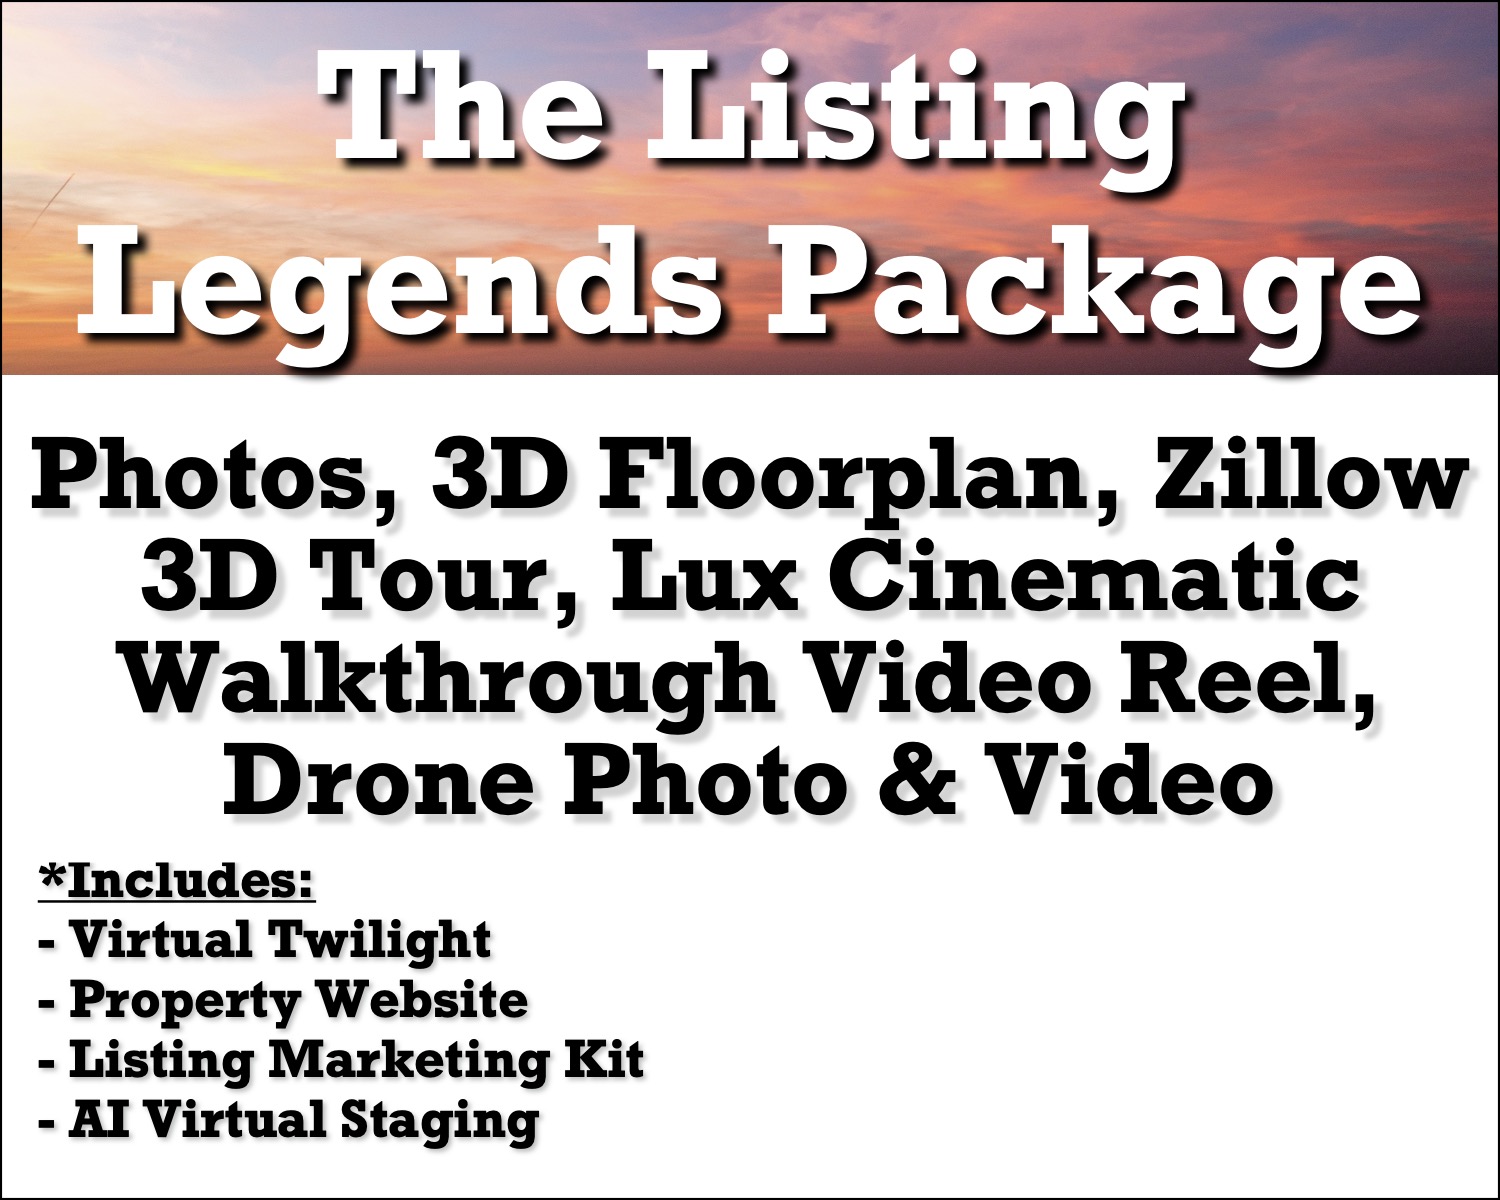 The Listing Legends Package